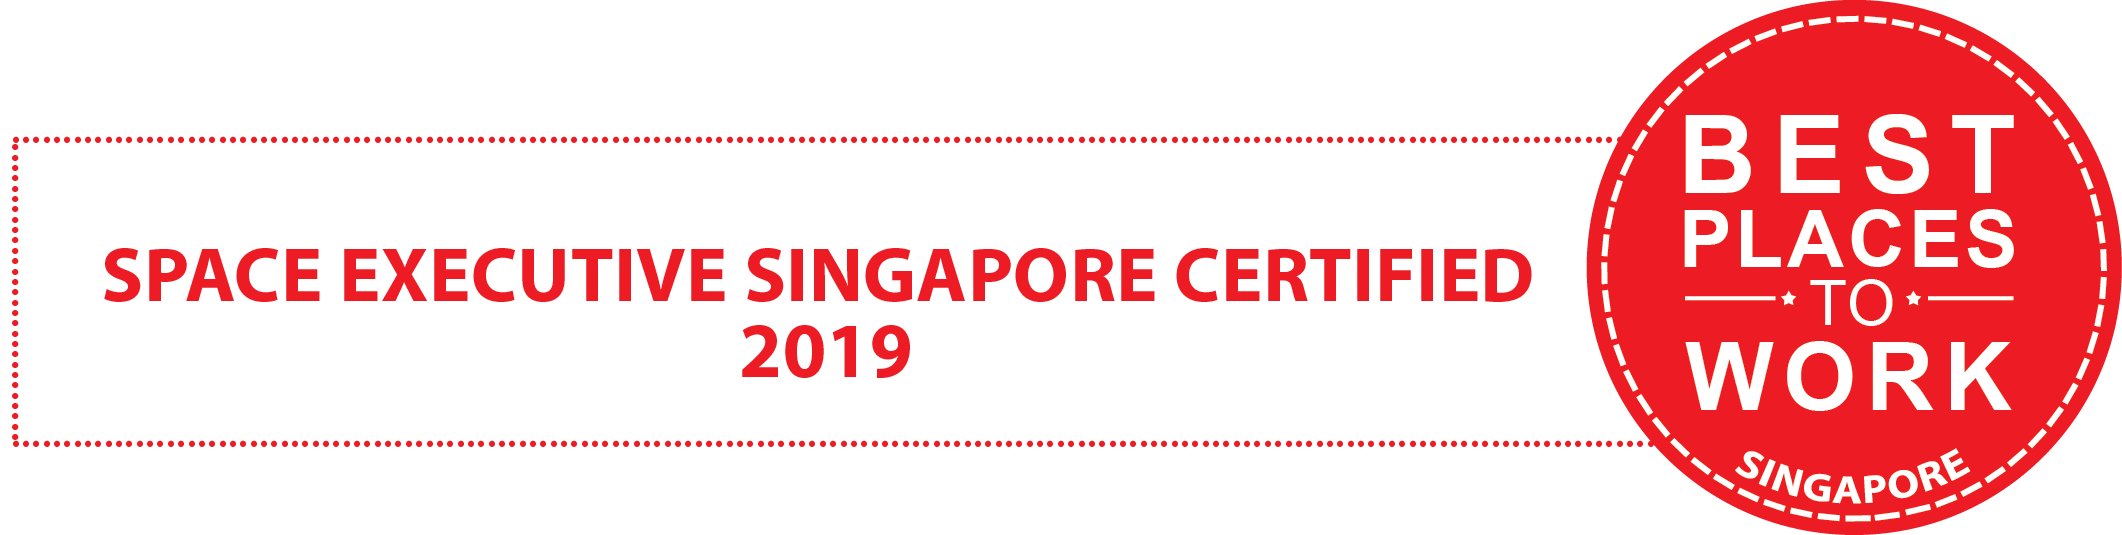 best places to work singapore 2019